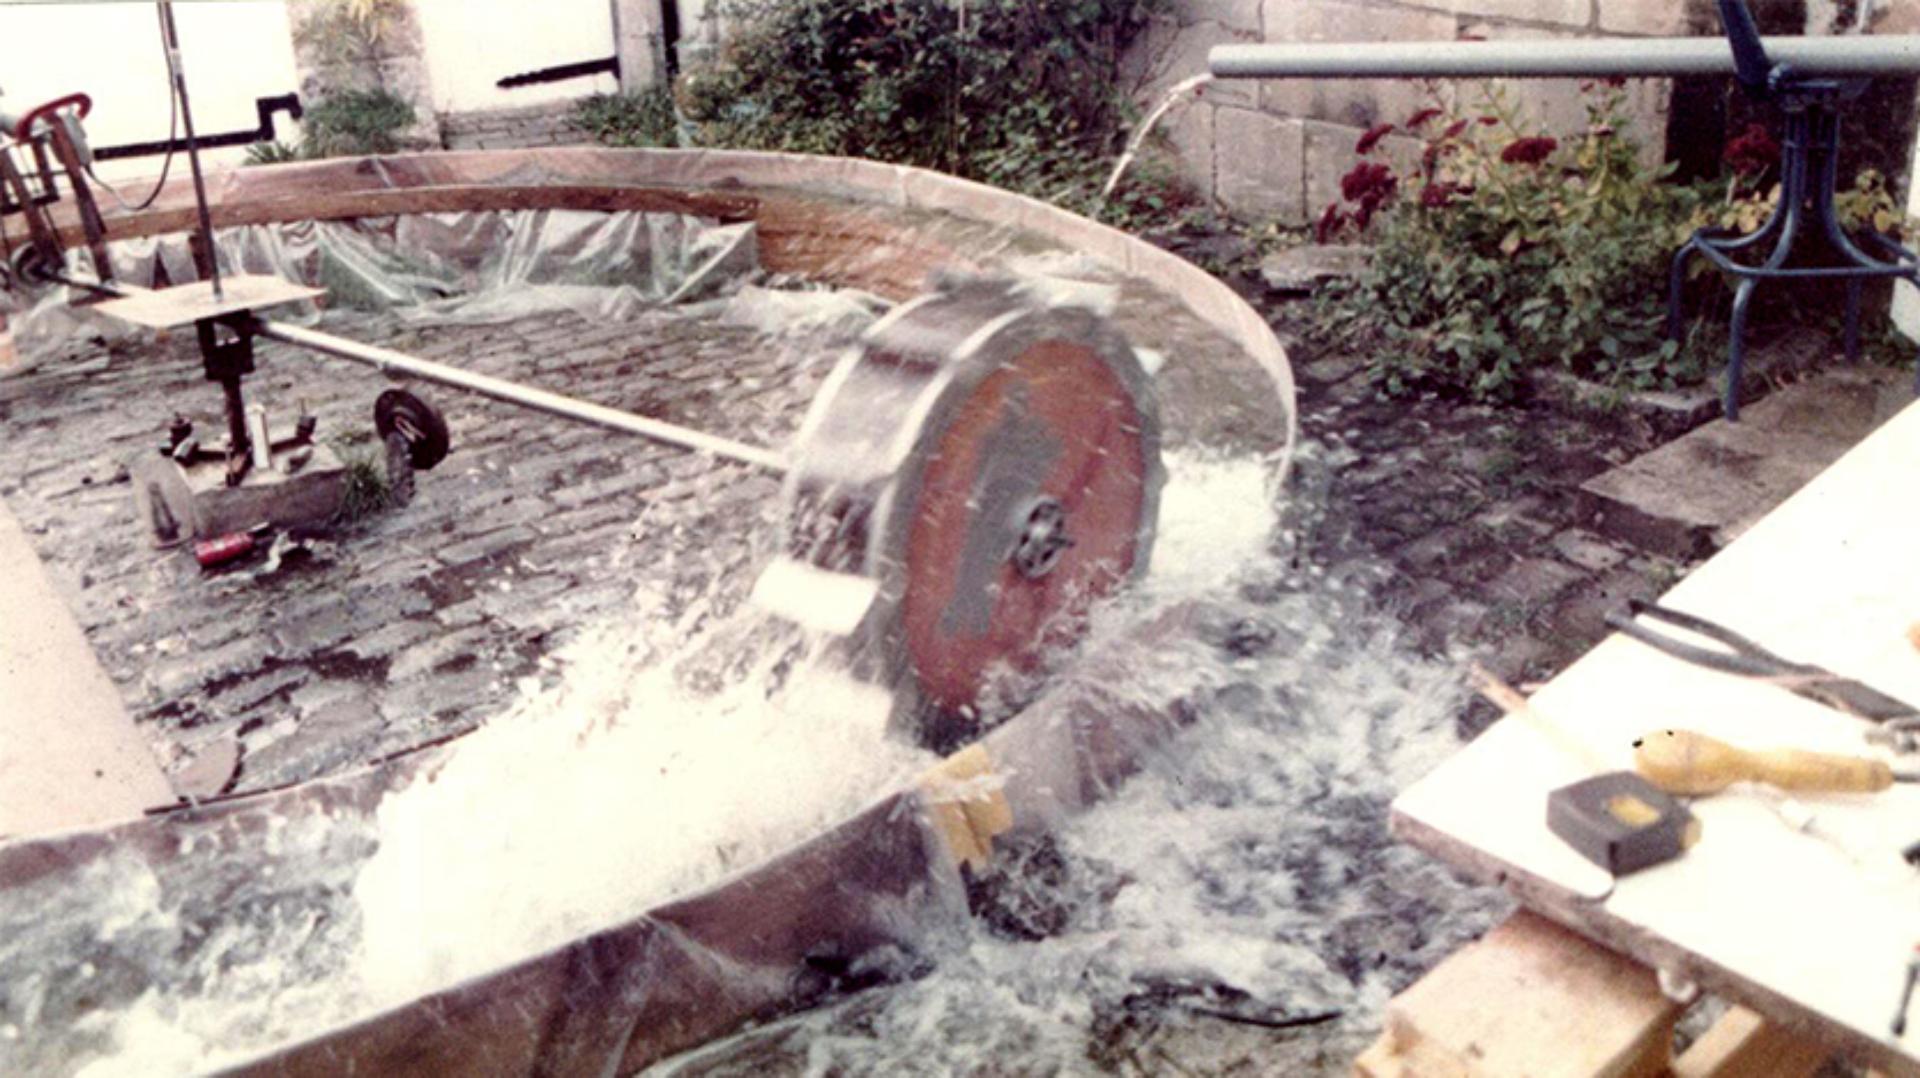 Wheelboat mechanics being tested in a water tank